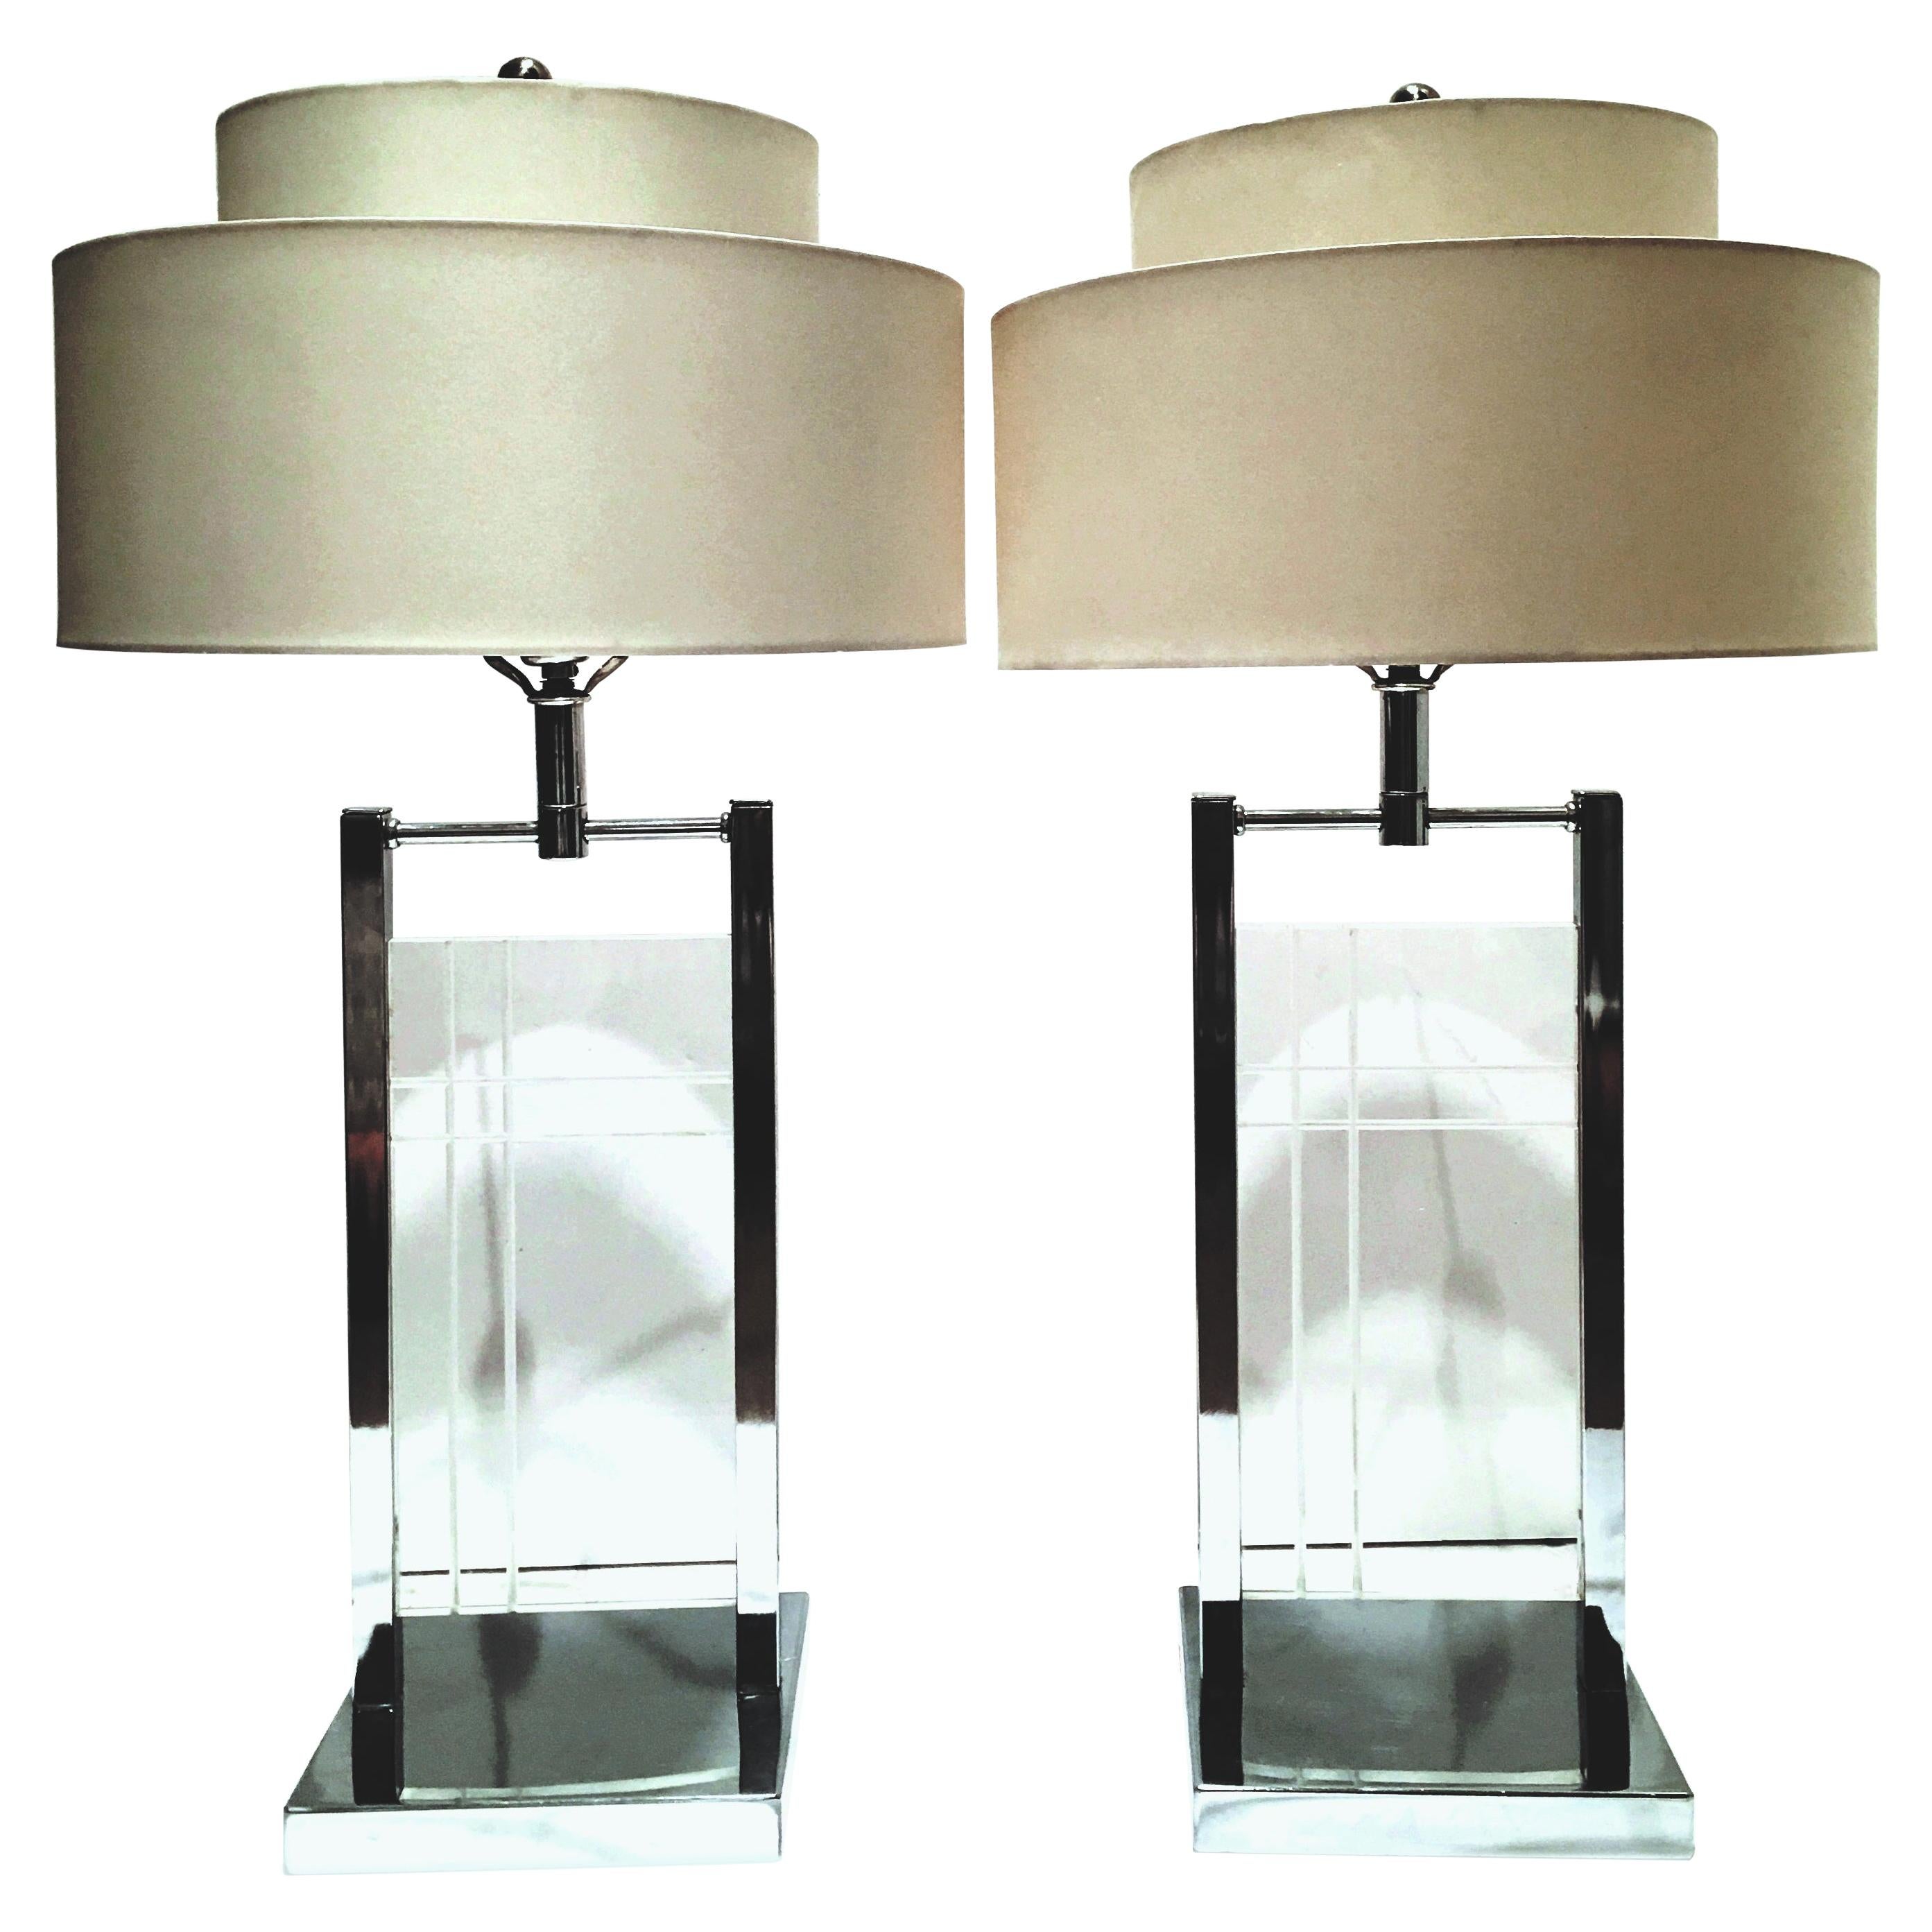 1970s pair of etched Lucite panel and chrome table lamps by George Kovacs. Features a geometric clean line etched motif on Lucite slab panel with chrome fittings. The Lucite panel measures, 13